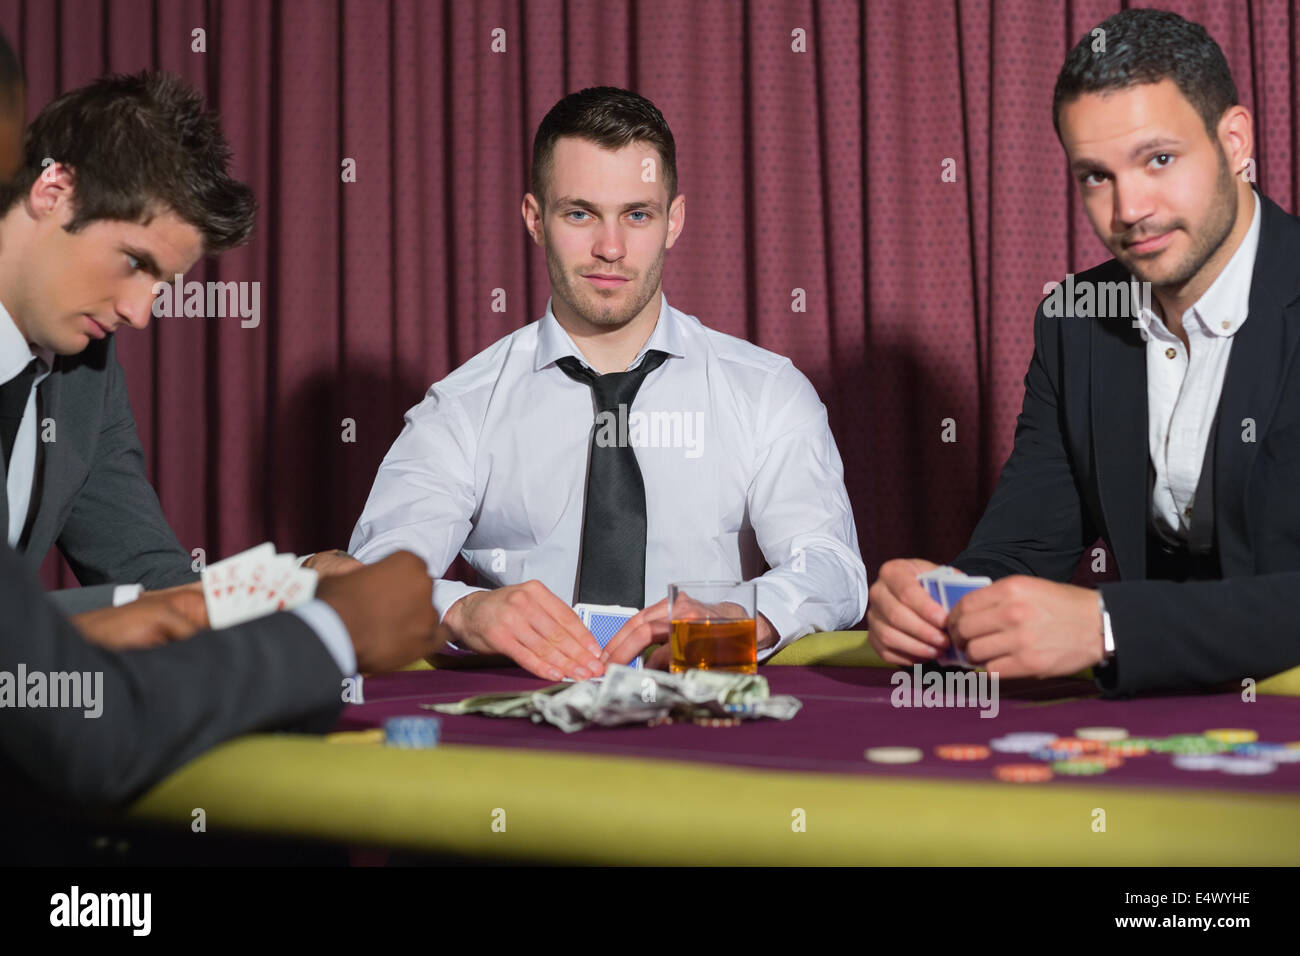 Two smiling men looking up from poker game Stock Photo